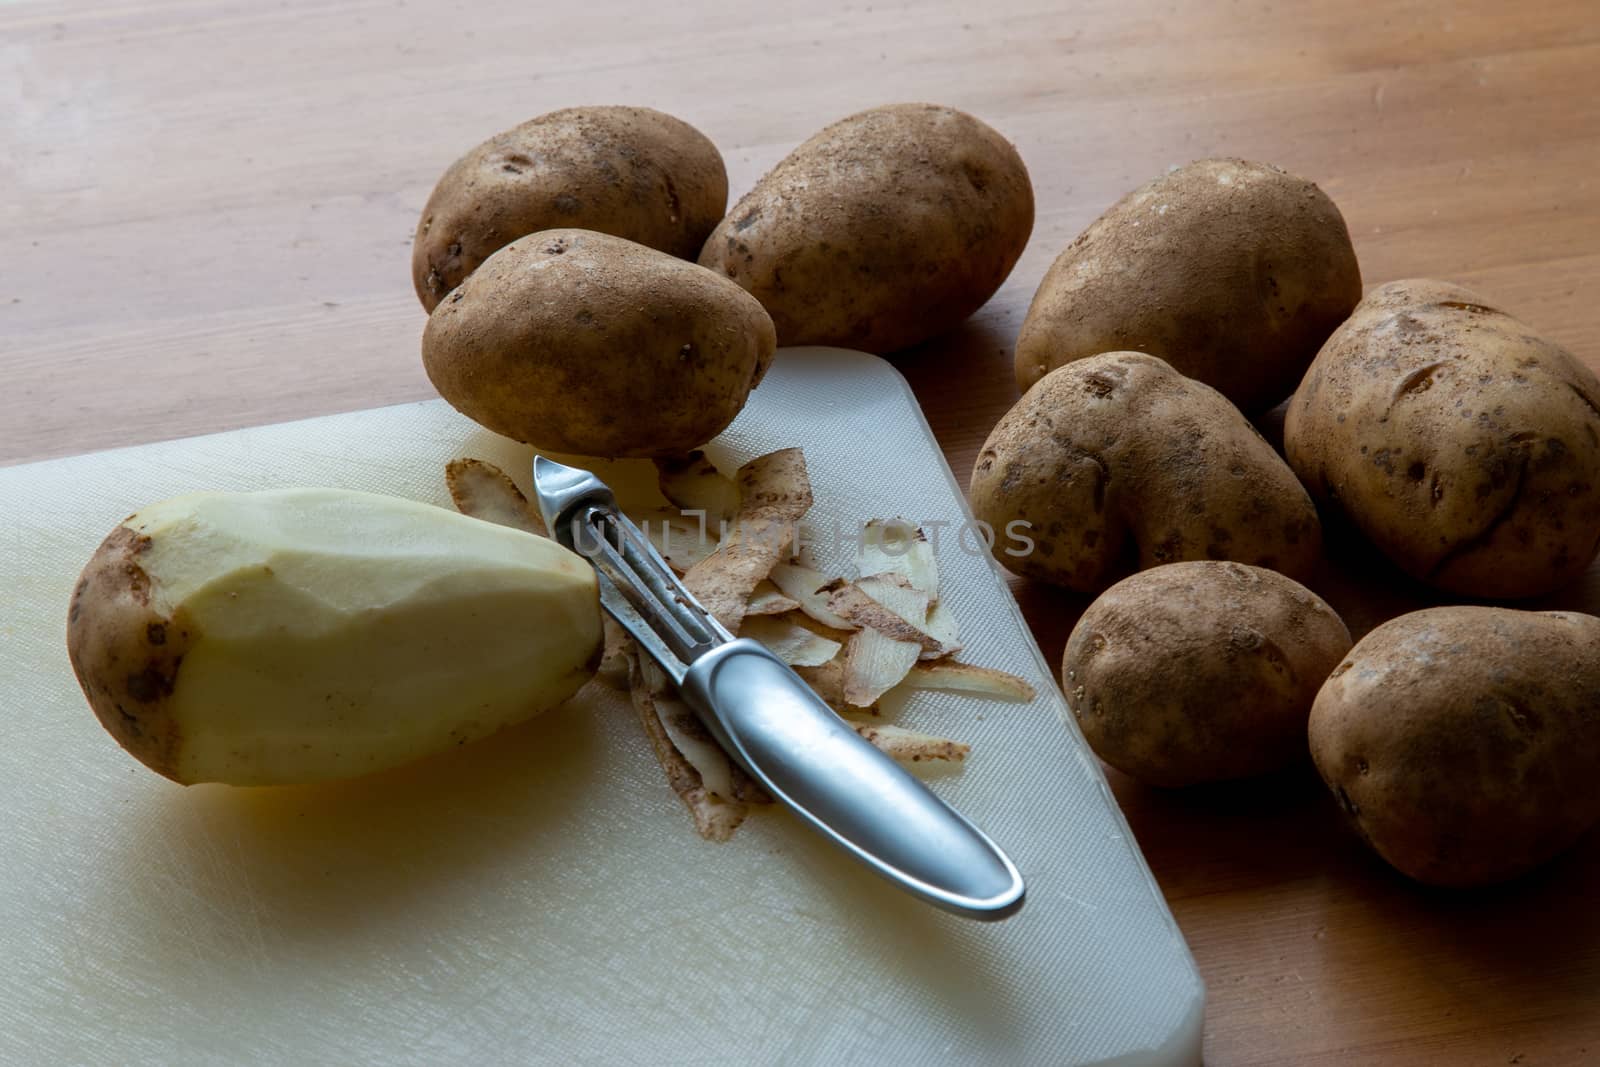 Peeling Potatoes on a Cutting Board by colintemple